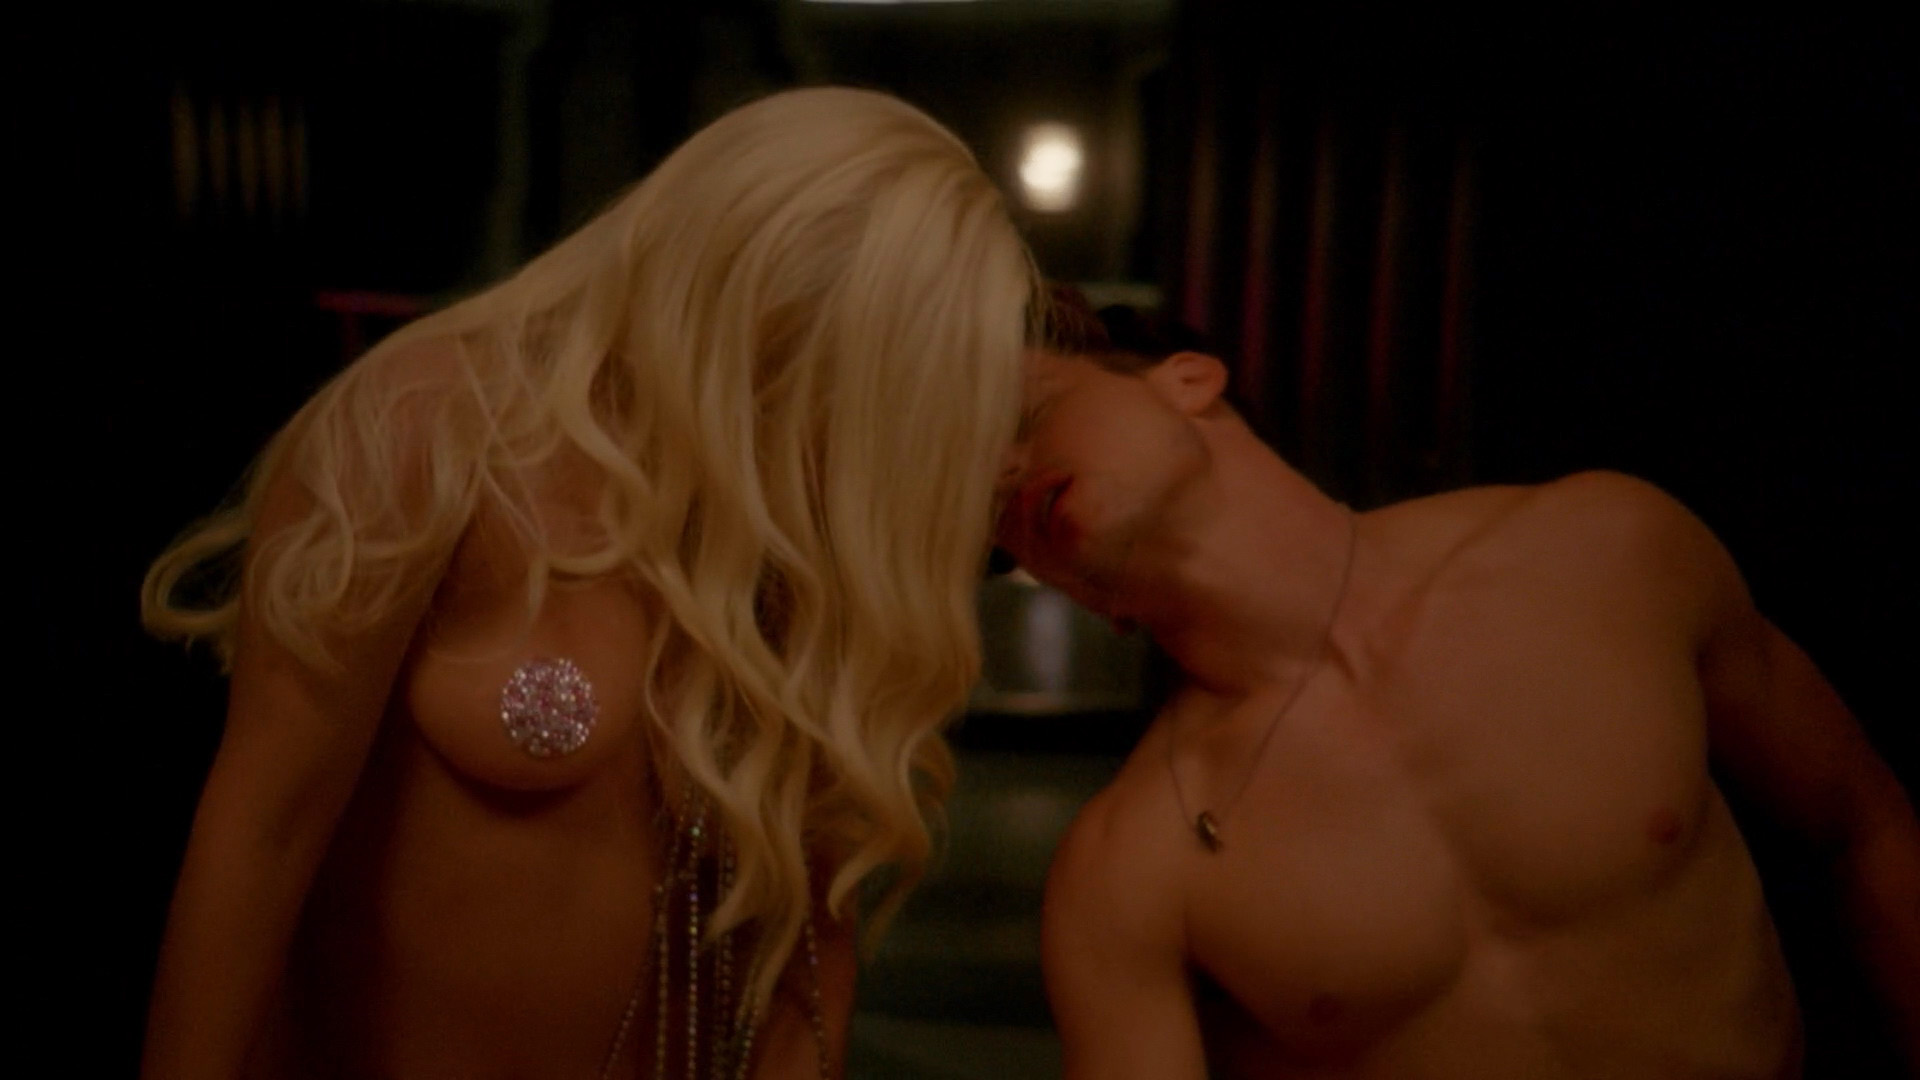 Watch Online Lady Gaga Chasty Ballesteros American Horror Story S05e01 2015 Hd 1080p